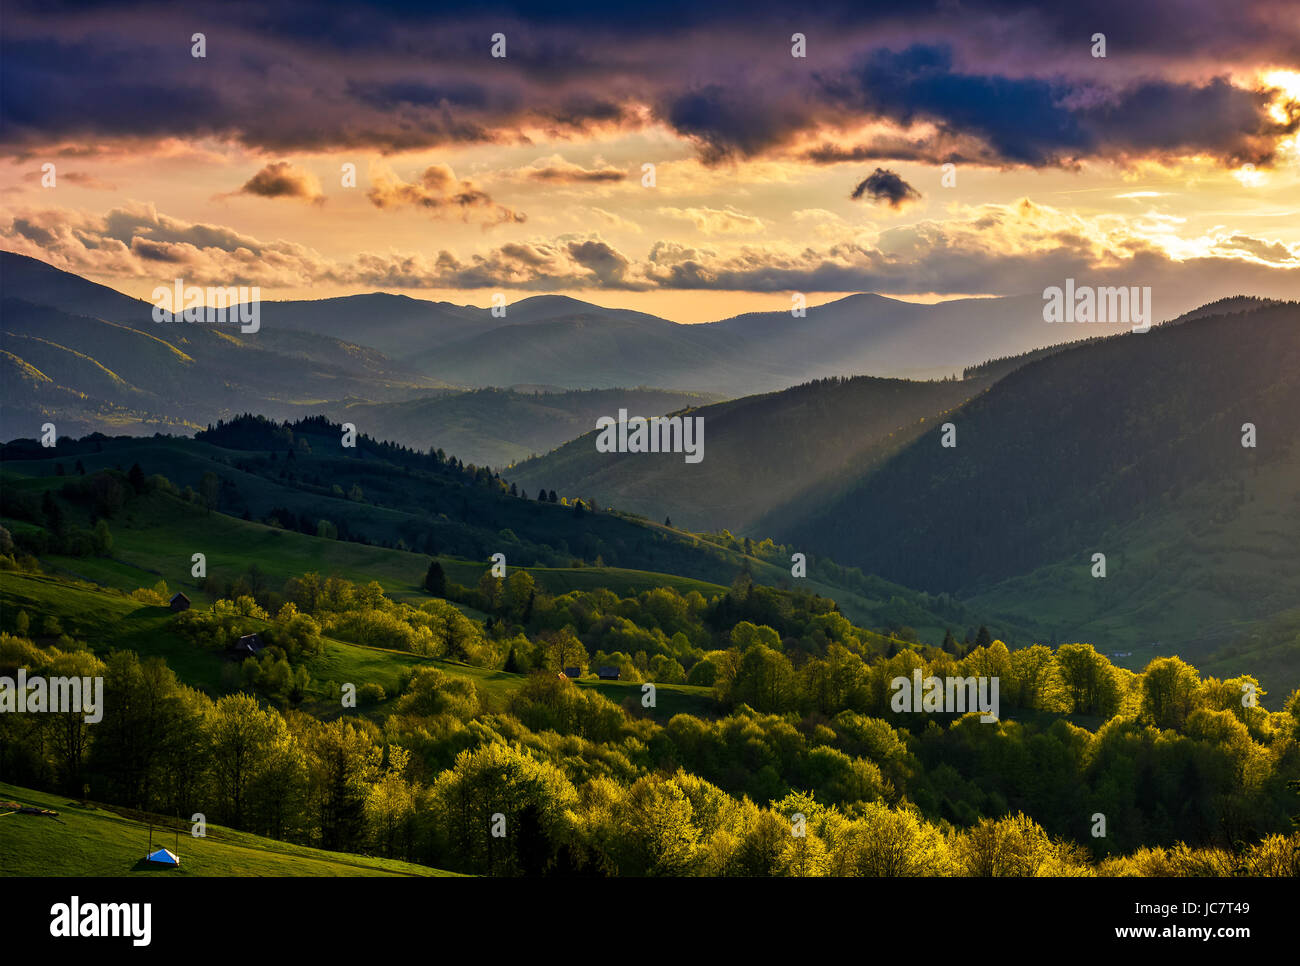 mountain rural area. agricultural fields on hills with forest. beautiful and vivid countryside landscape with cloudy sky at sunset. Stock Photo